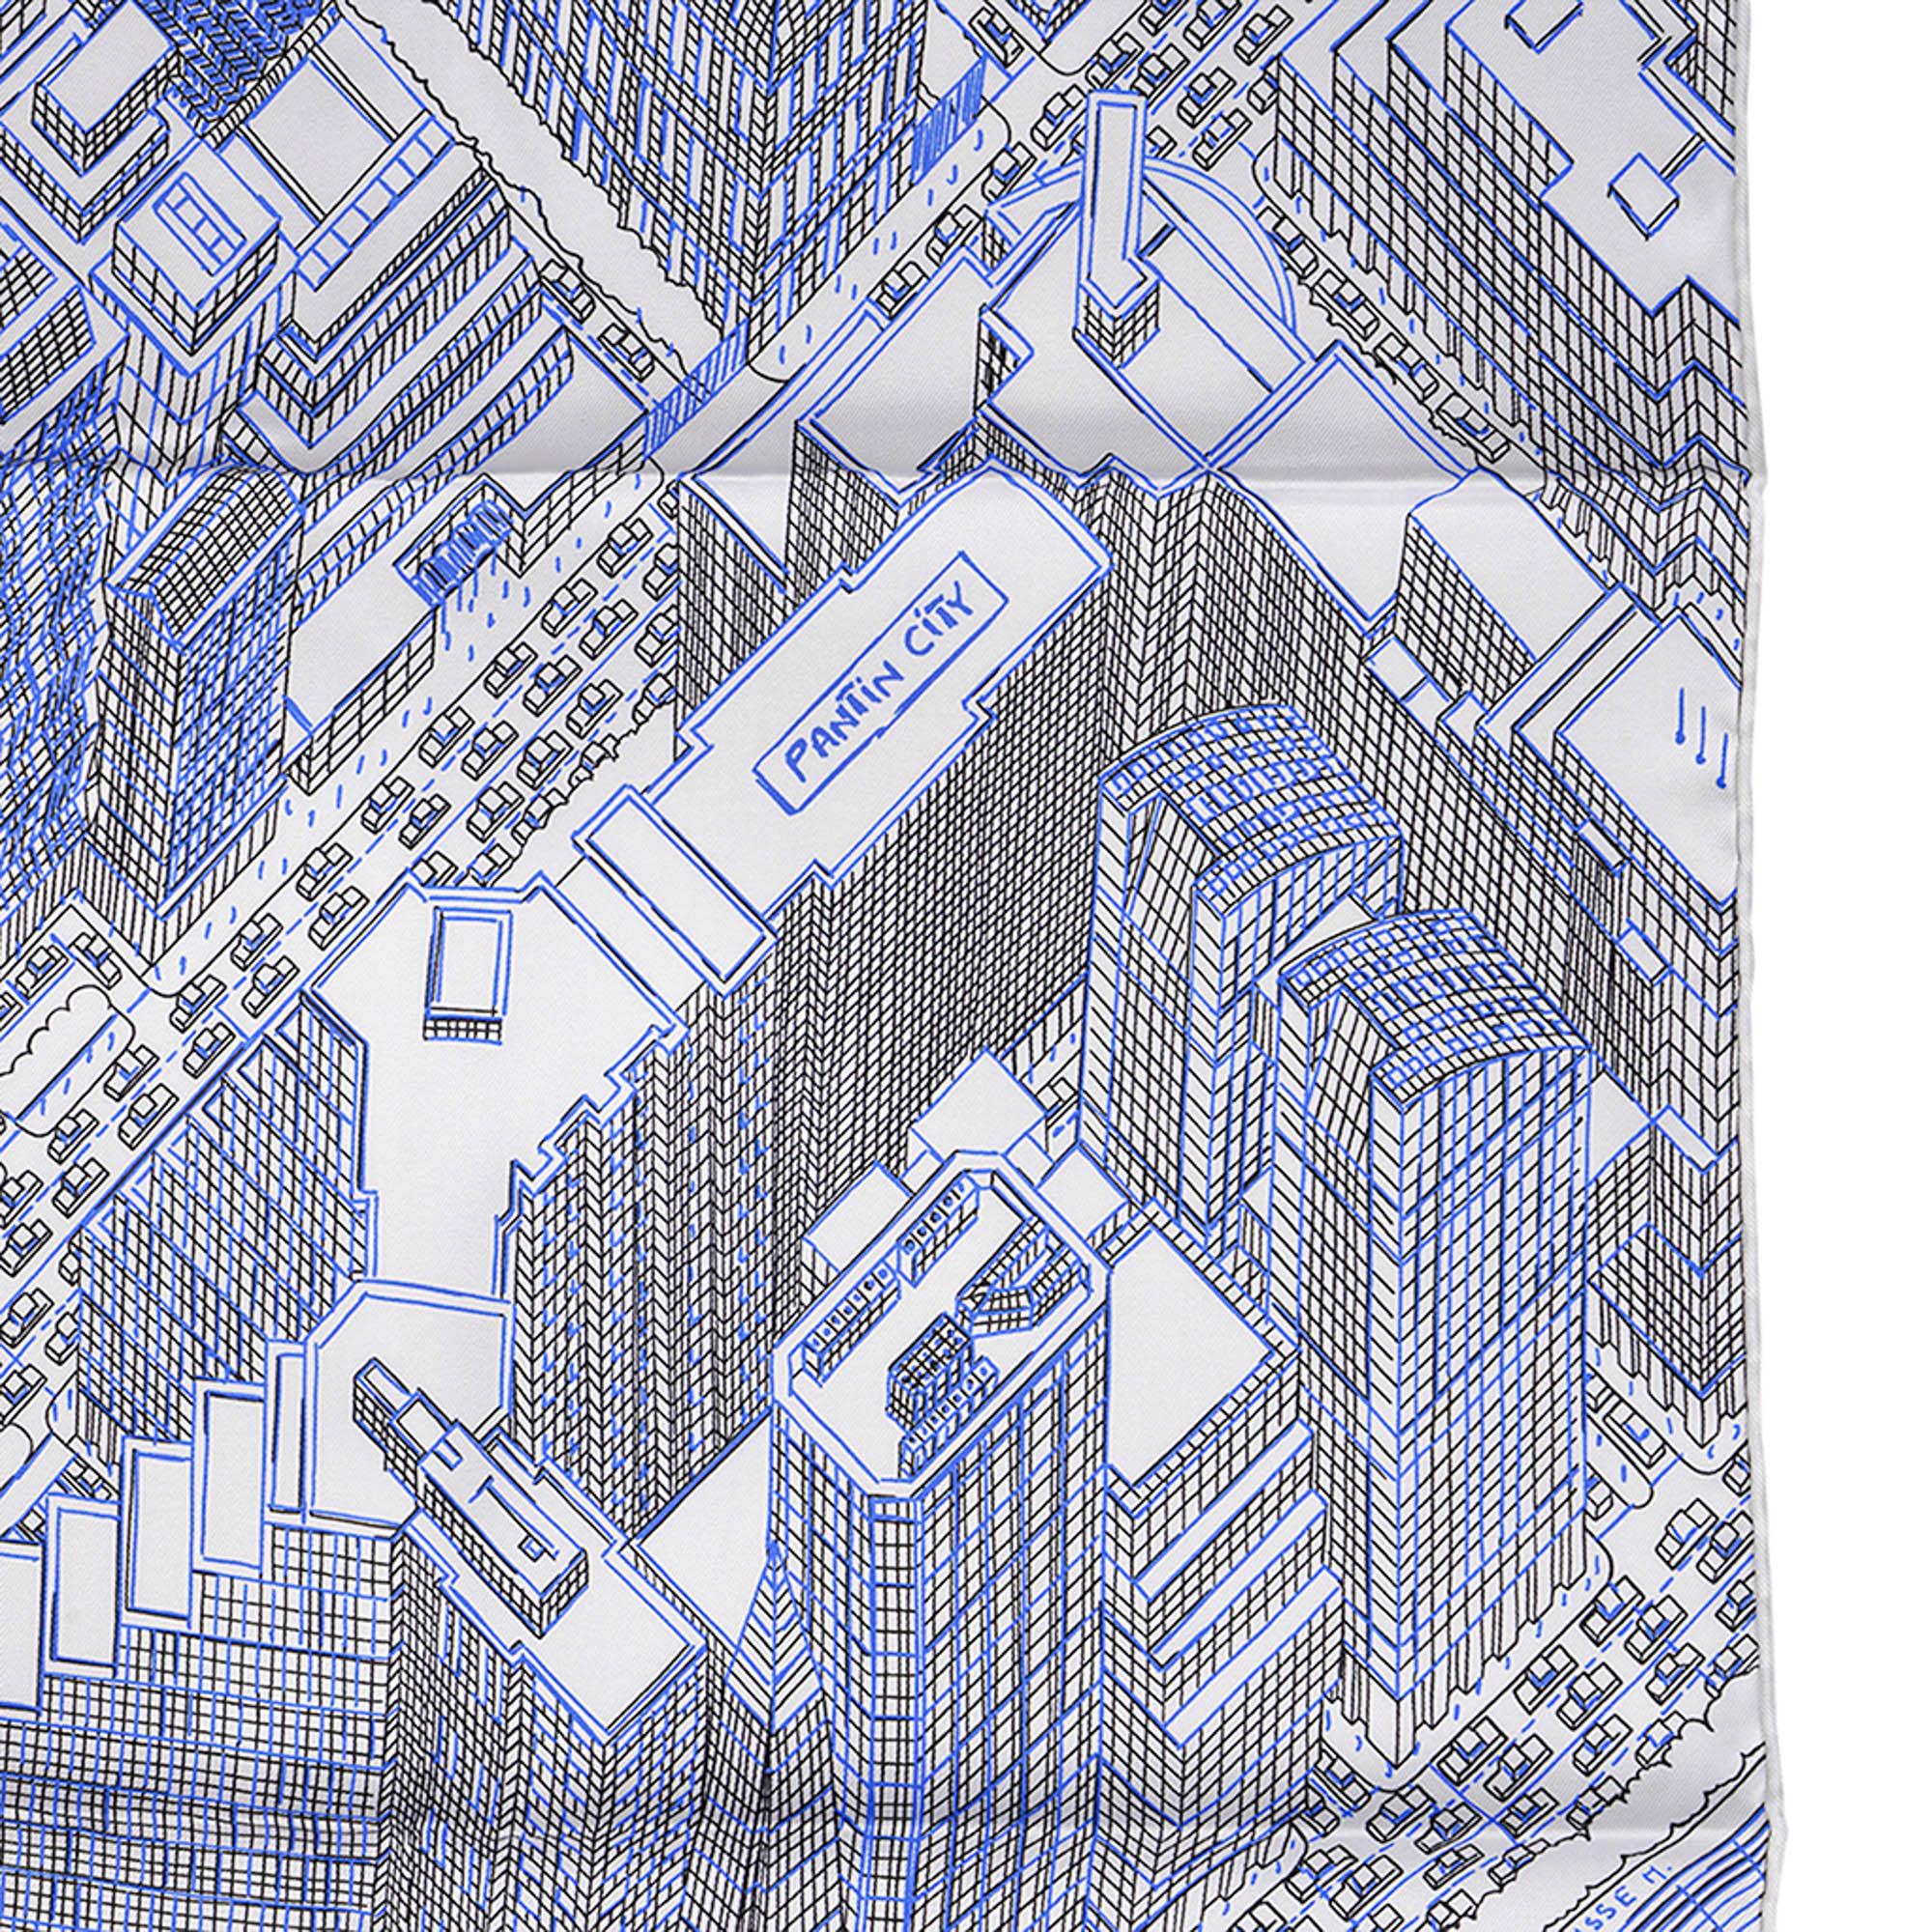 Mightychic offers an Hermes Pantin City silk twill scarf.
Featured in Blanc, Bleu and Noir colorway.
Depicts an aerial view of Pantin City, a suburb of Paris.
Designed by Mamadou Cisse.
Hand rolled edge.
Comes with Signature Hermes box and